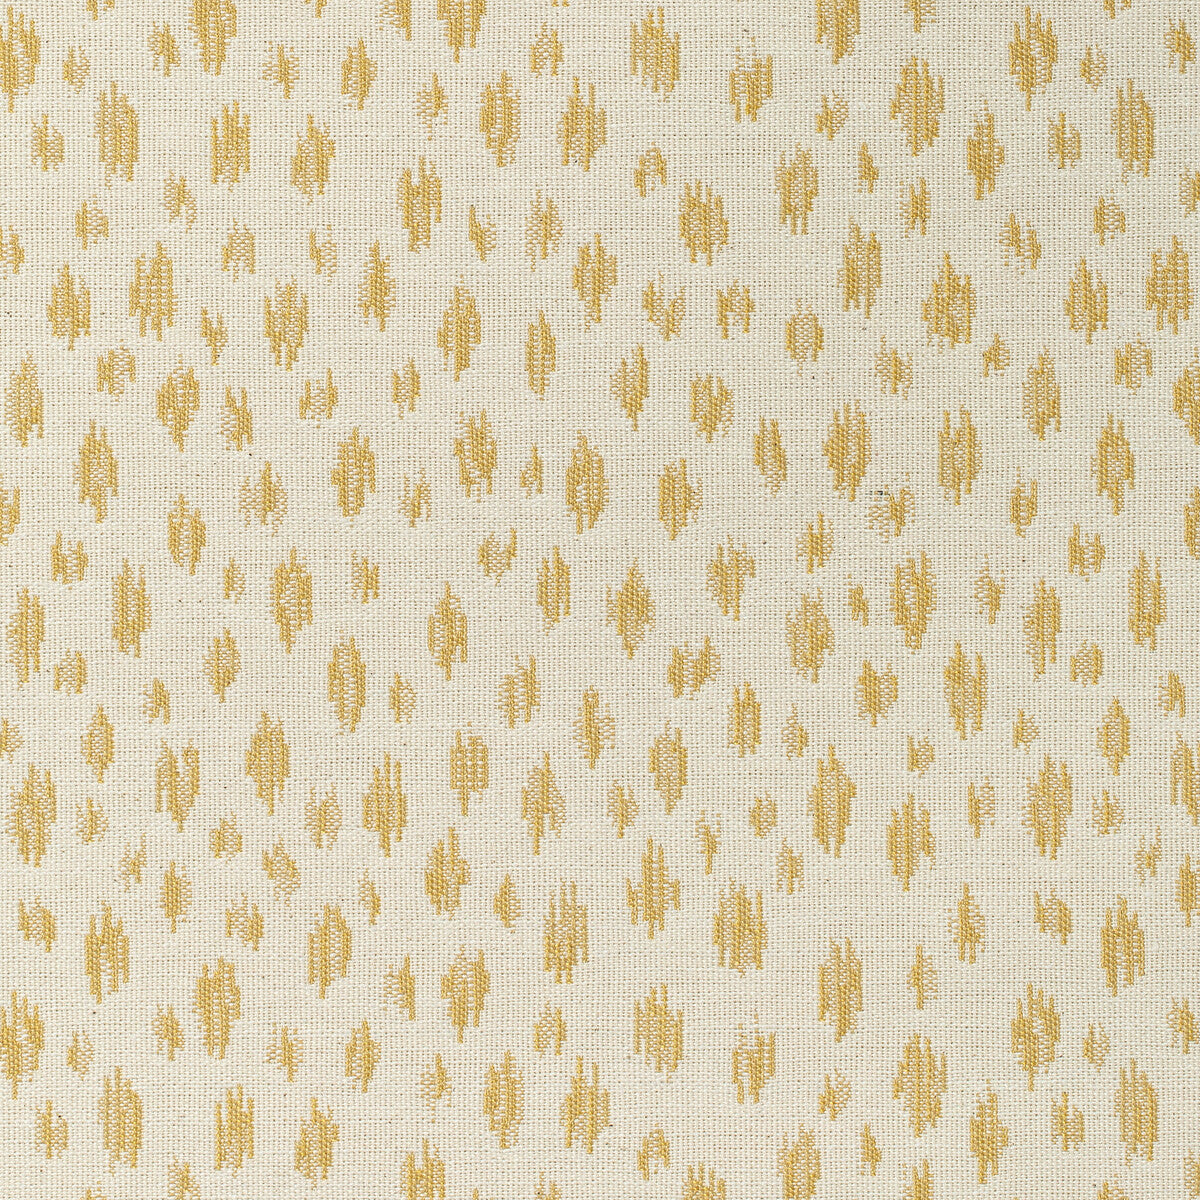 Honfleur Woven fabric in canary color - pattern 8020112.4.0 - by Brunschwig &amp; Fils in the Granville Weaves collection